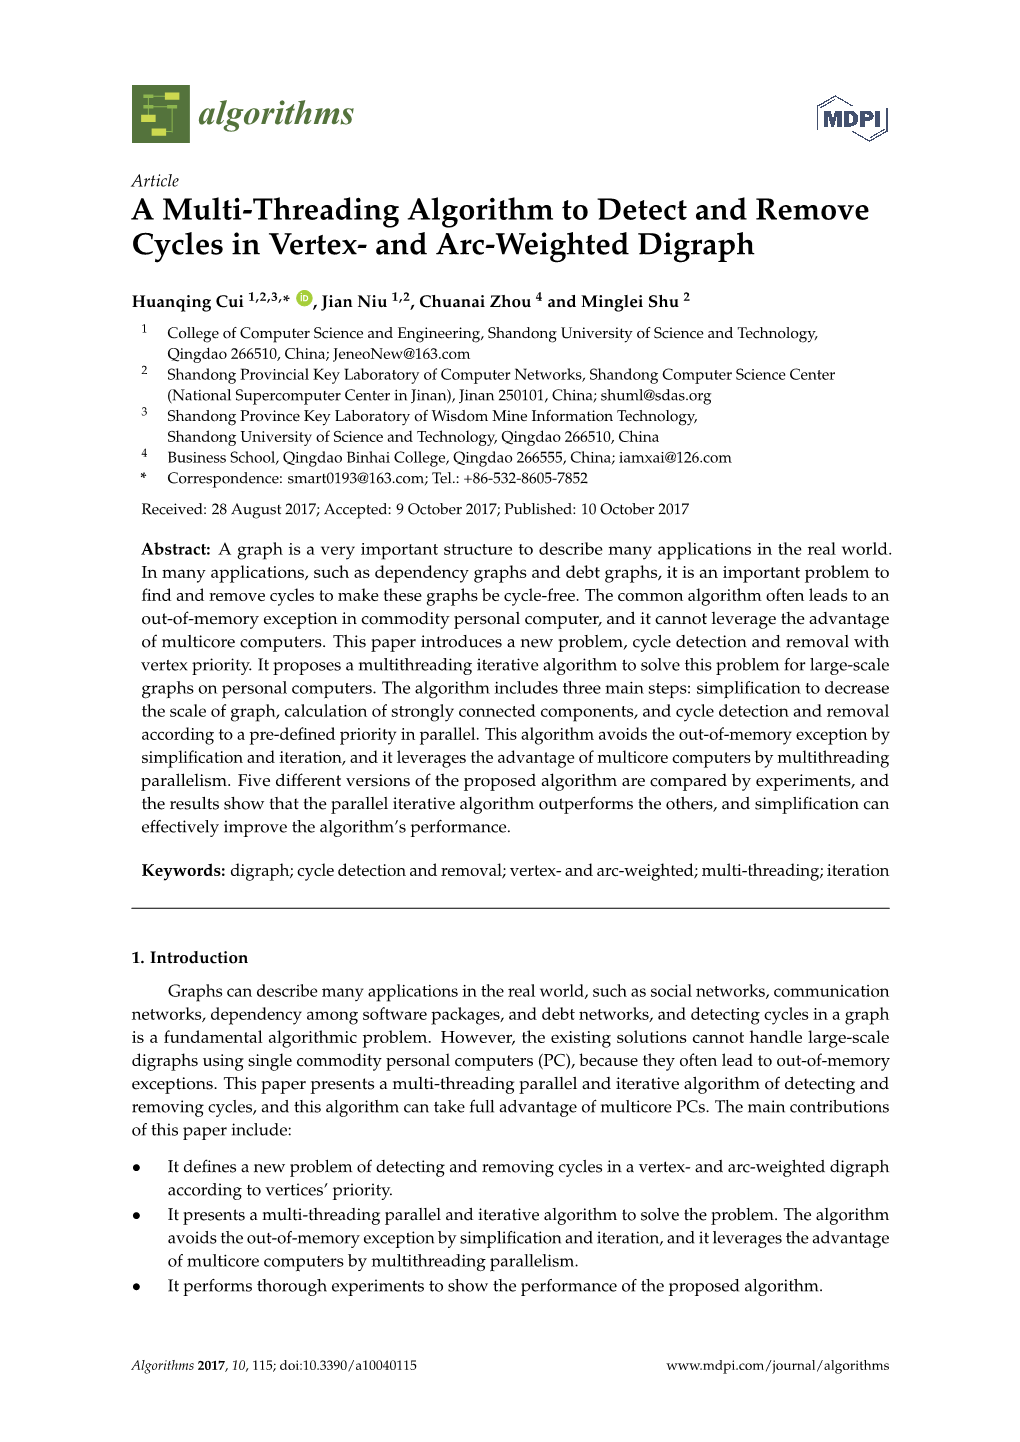 A Multi-Threading Algorithm to Detect and Remove Cycles in Vertex- and Arc-Weighted Digraph